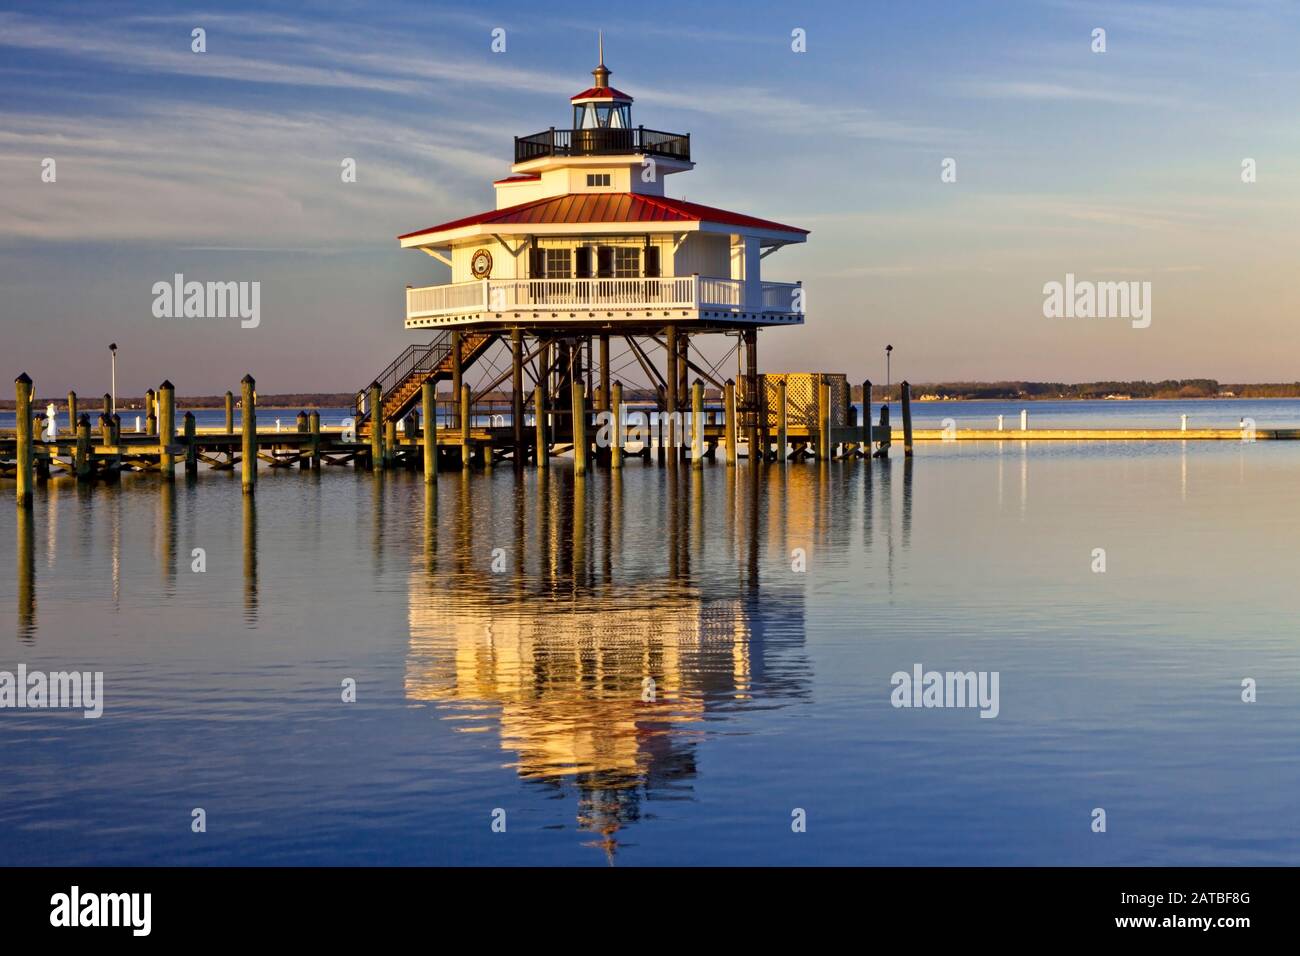 The Choptank River Light, a screw-pile lighthouse, is located near Cambridge, Maryland in the Chesapeake Bay, USA Stock Photo